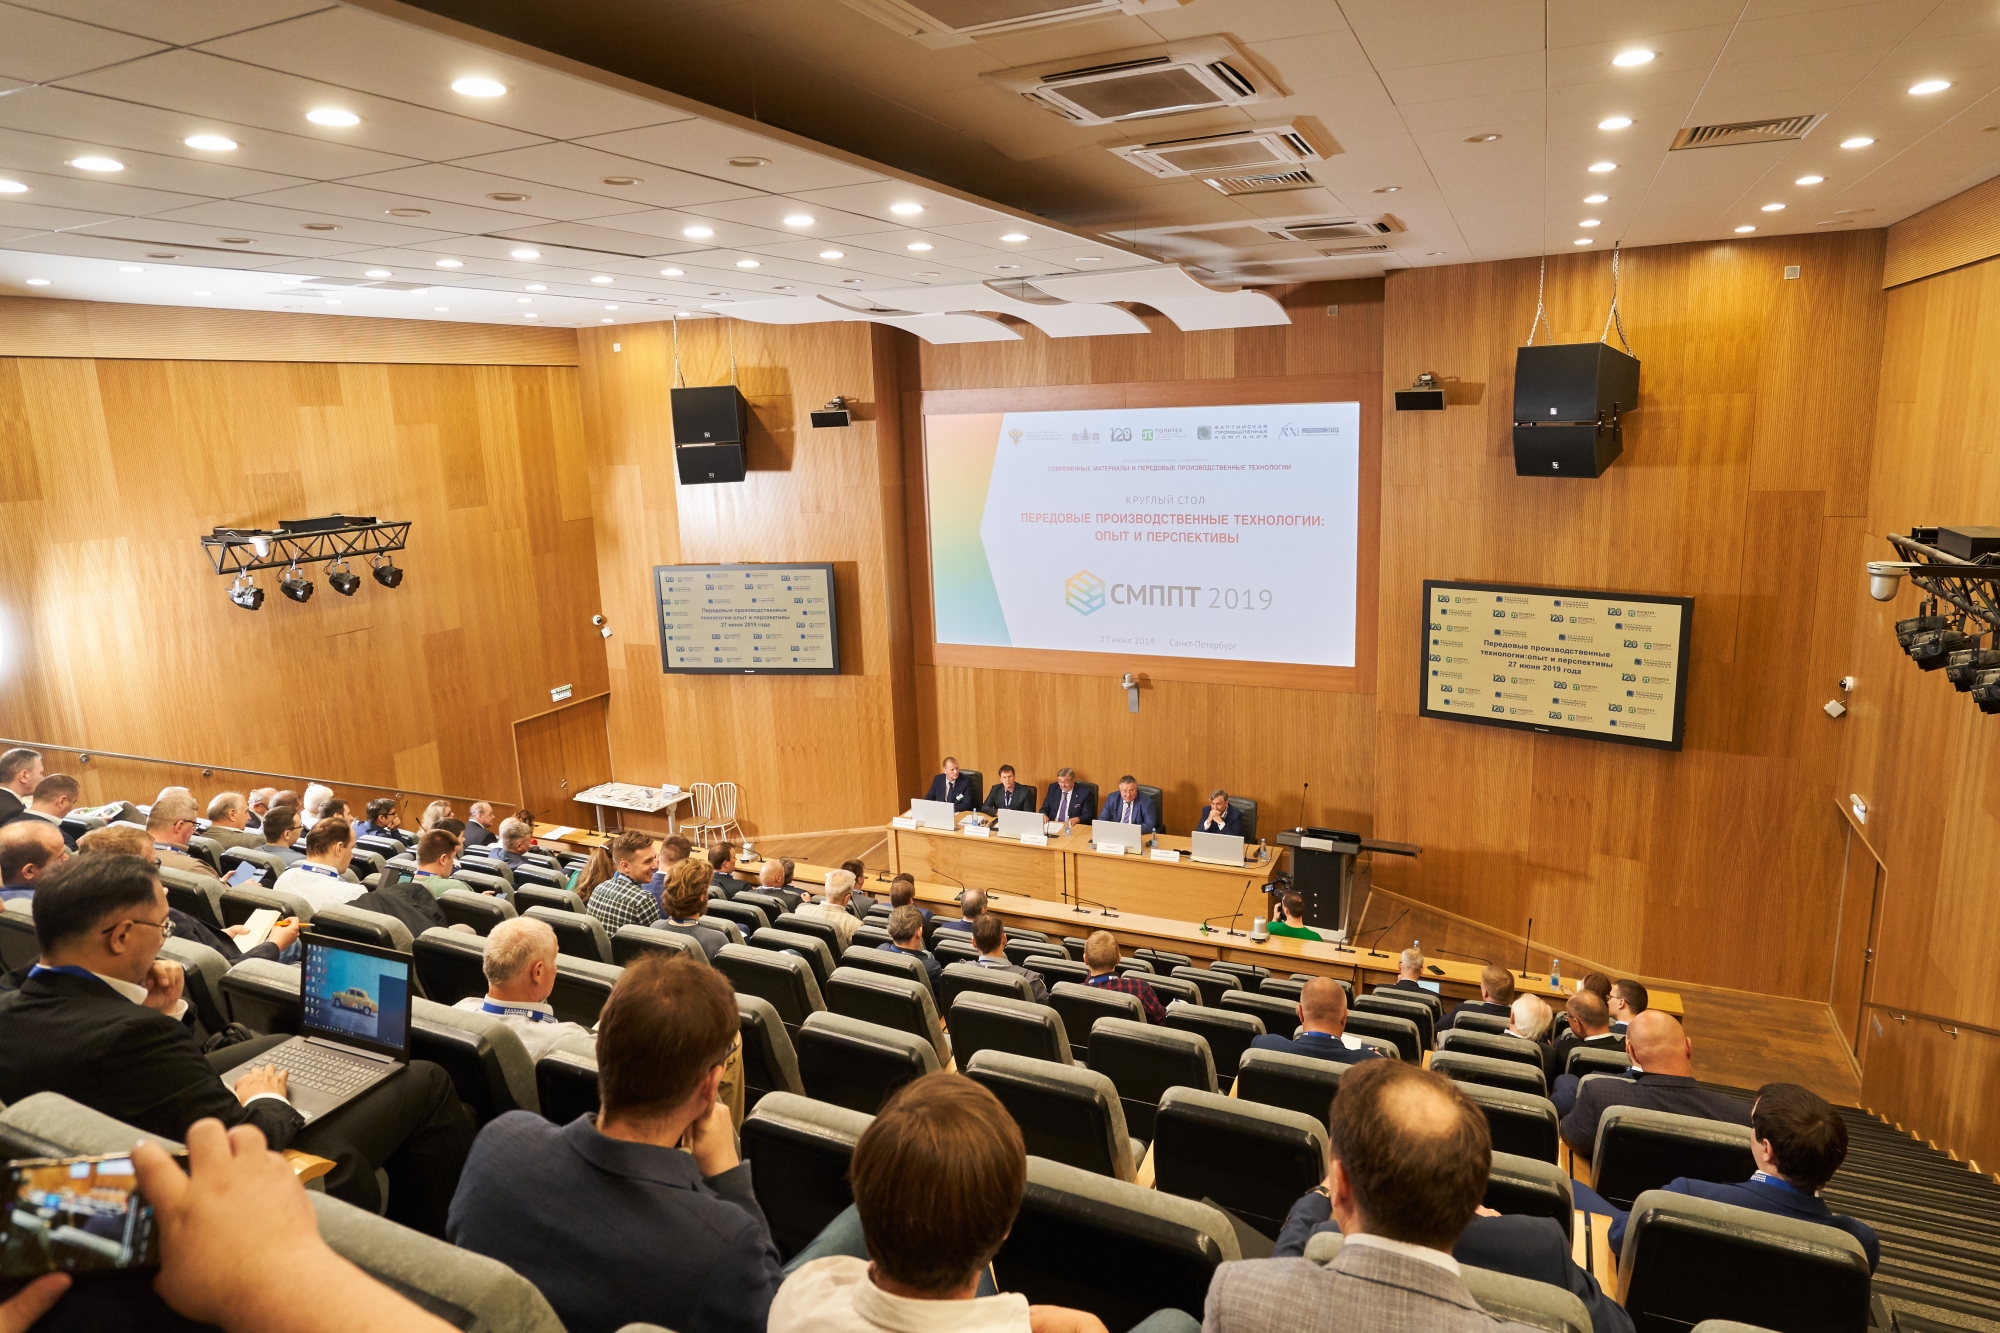 St. Petersburg Polytechnic University Peter the Great hosted a roundtable discussion on Advanced Manufacturing Technologies: Experience and Prospects